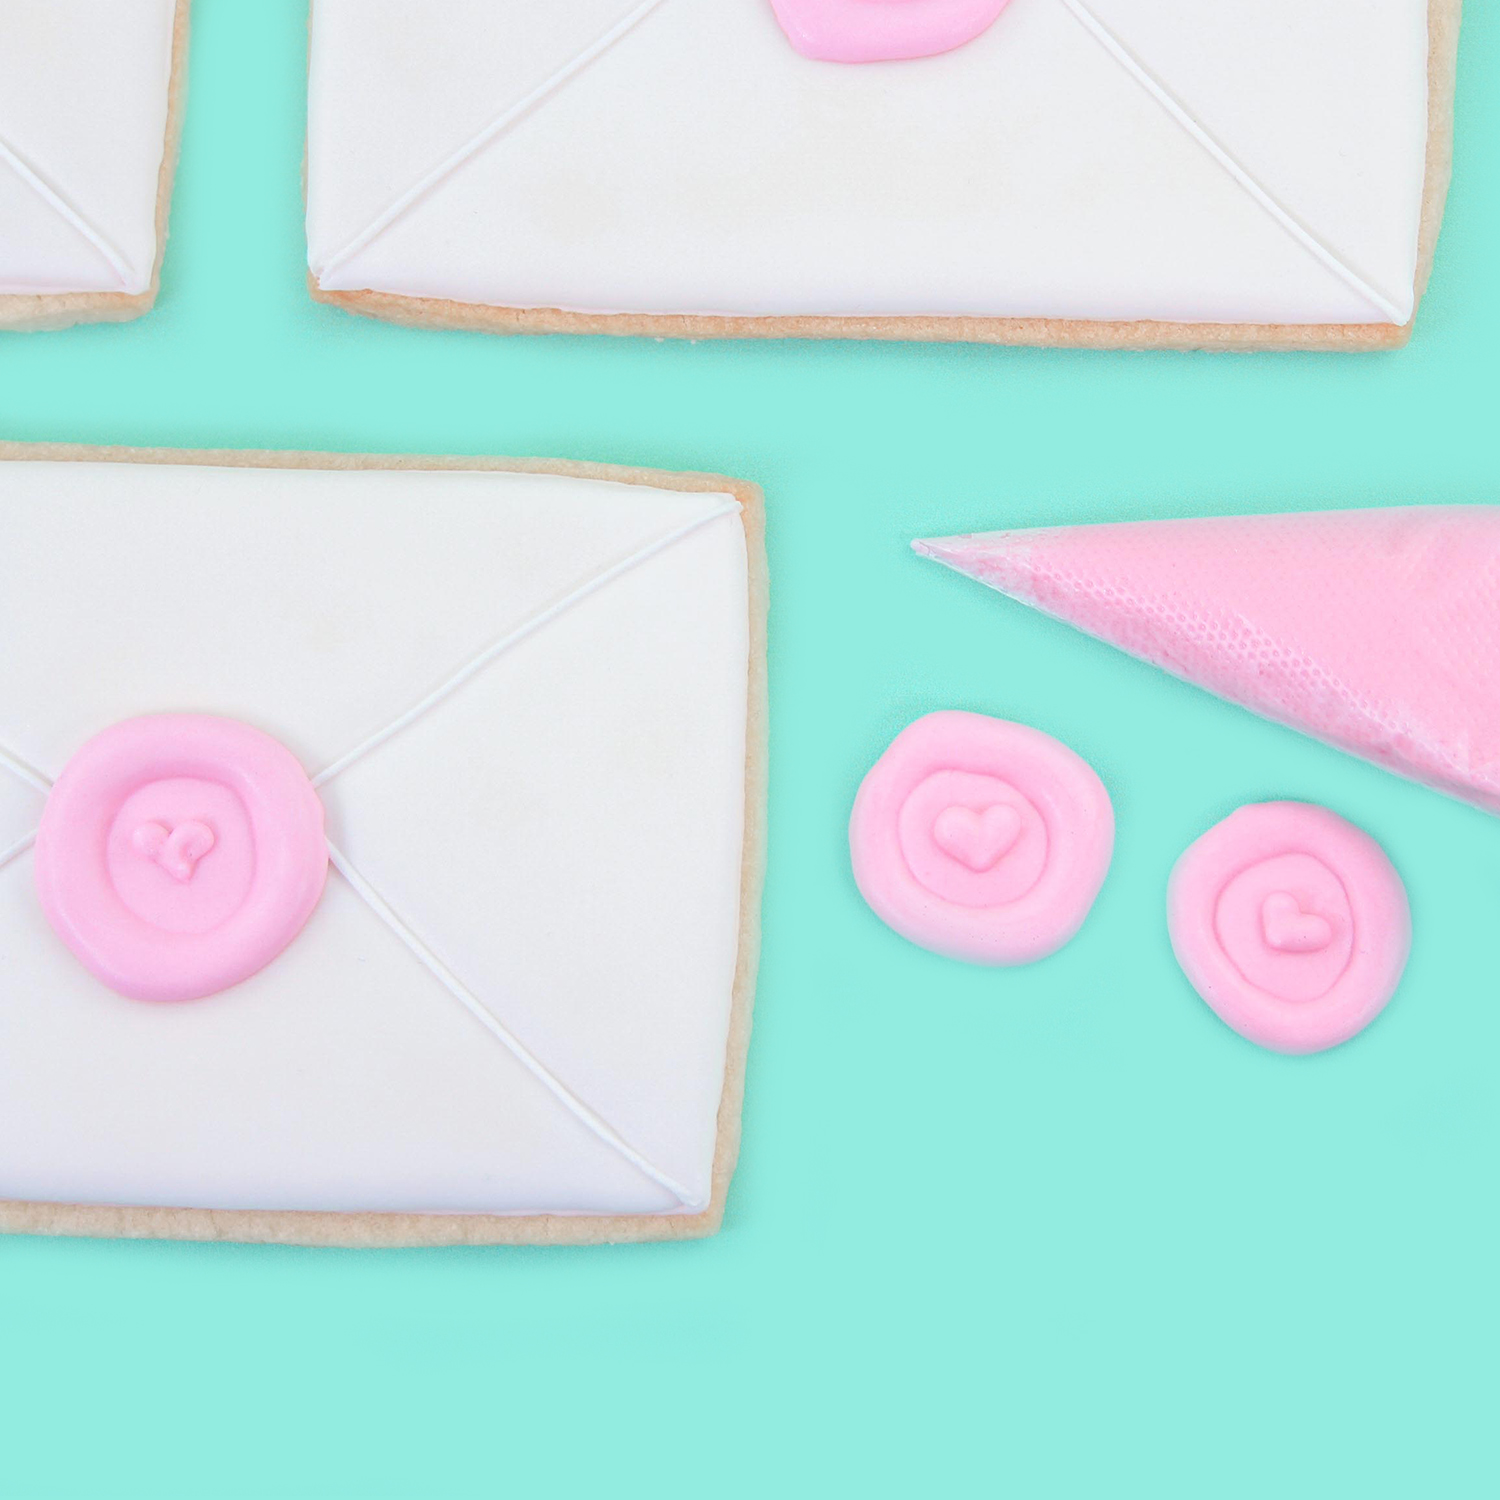 Finished Royal Icing Envelope Cookies